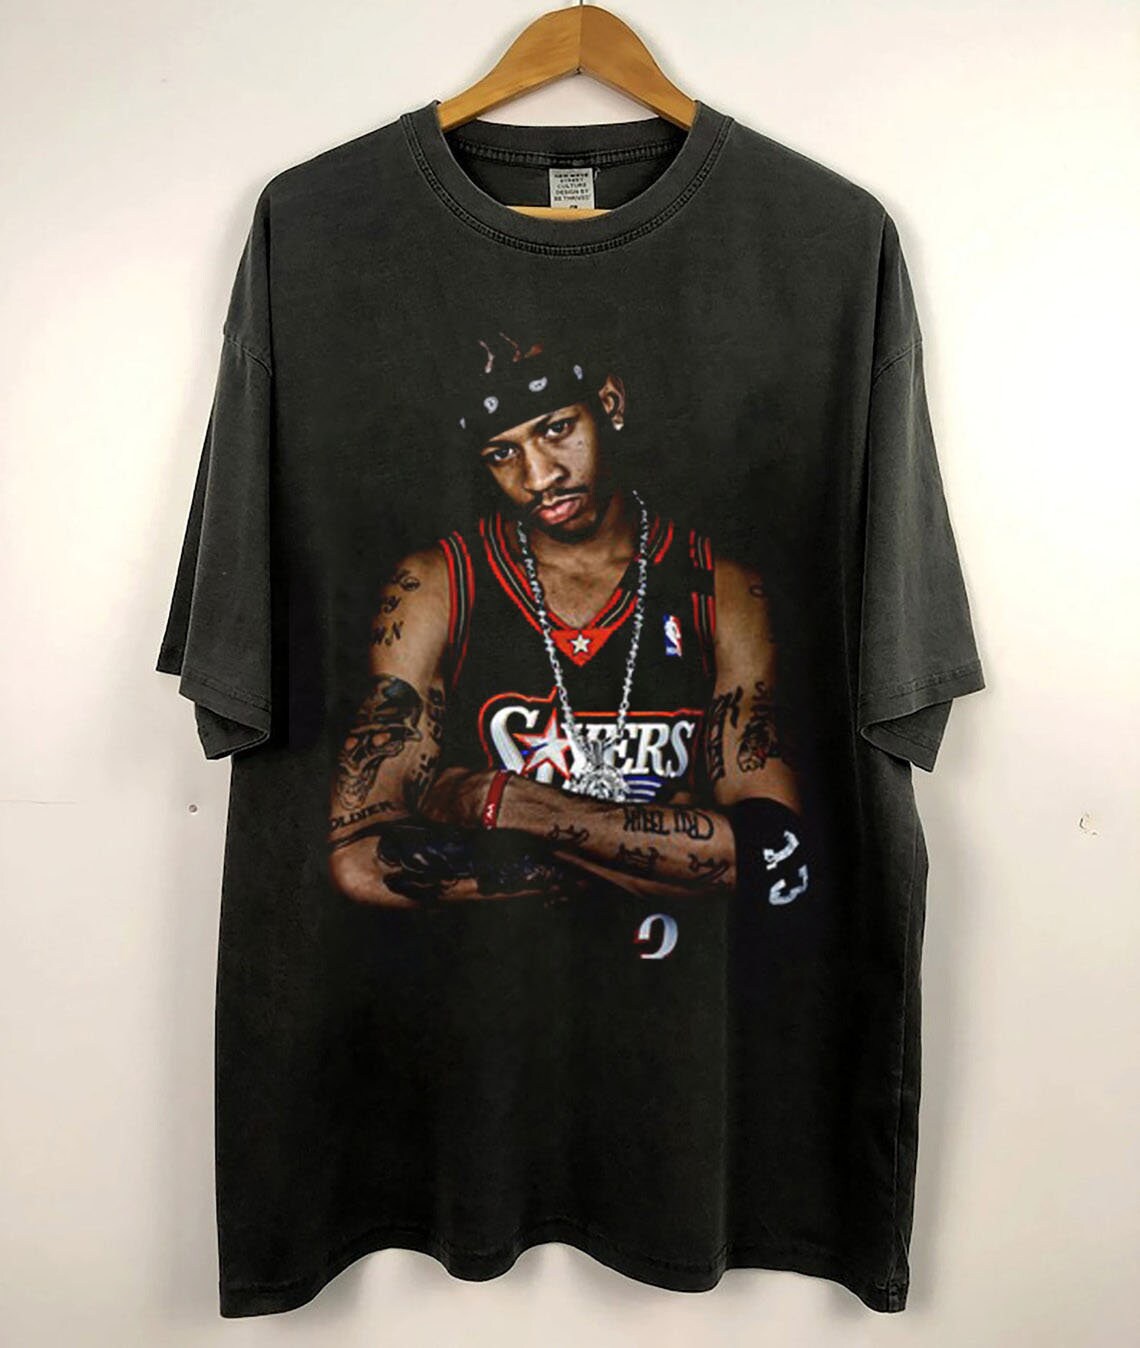 Allen Iverson Practice Magazine Graphic Tee – TheeArtistry